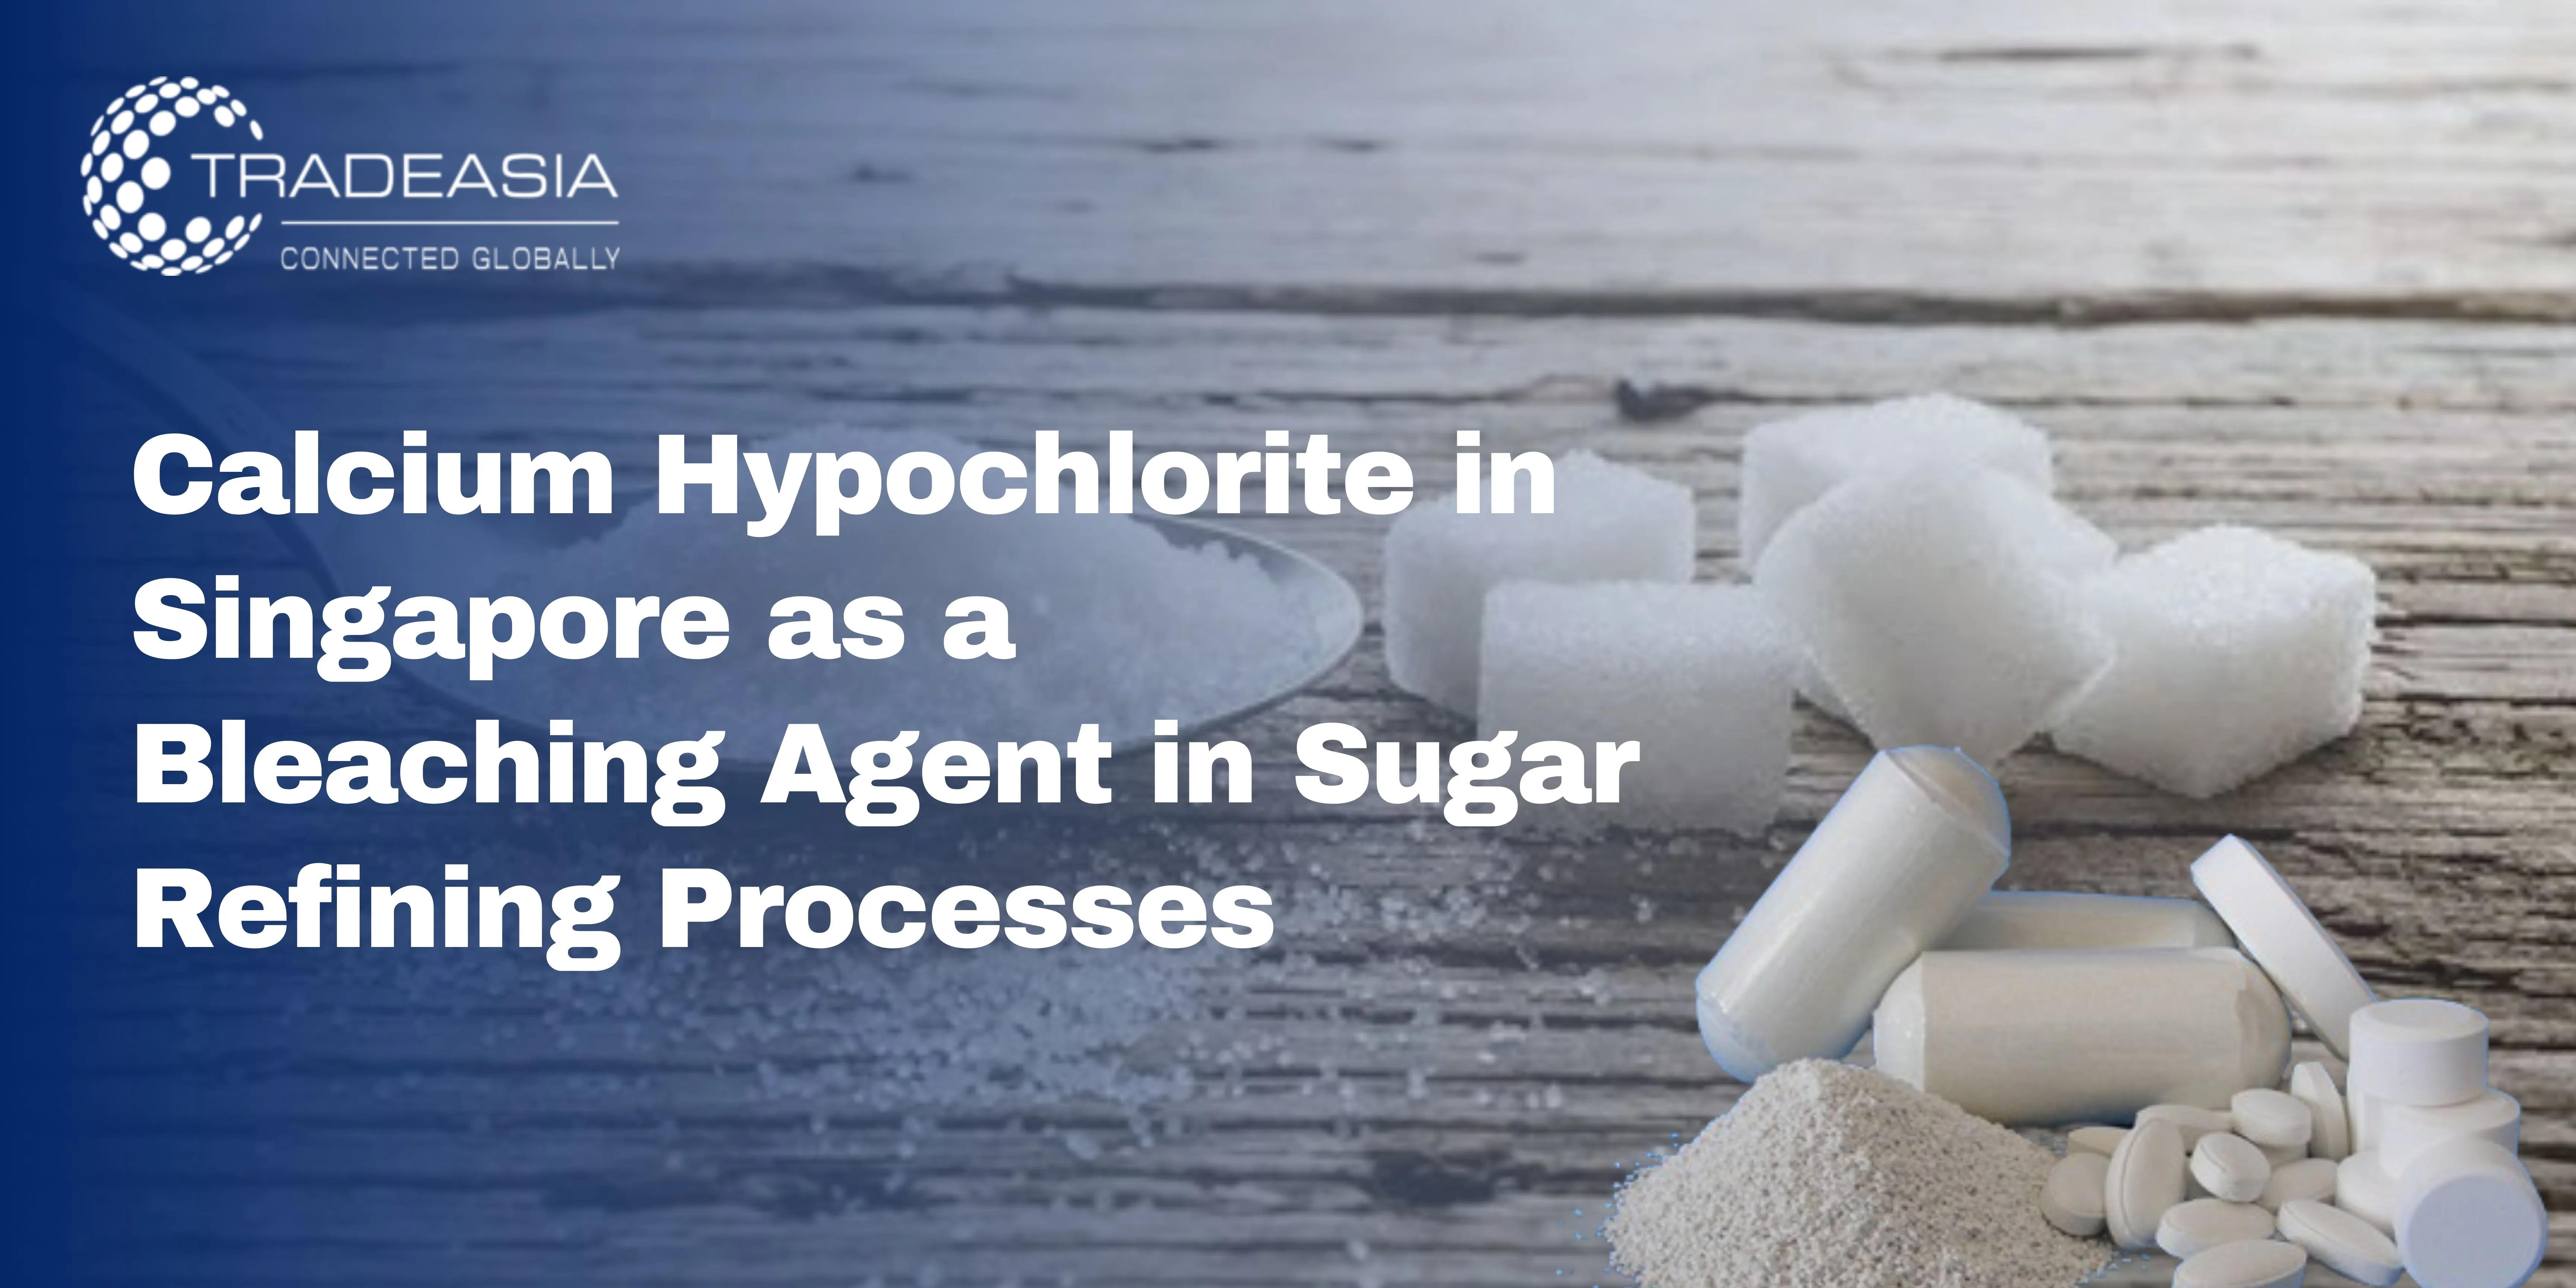 Calcium Hypochlorite in Singapore as a Bleaching Agent in Sugar Refining Processes